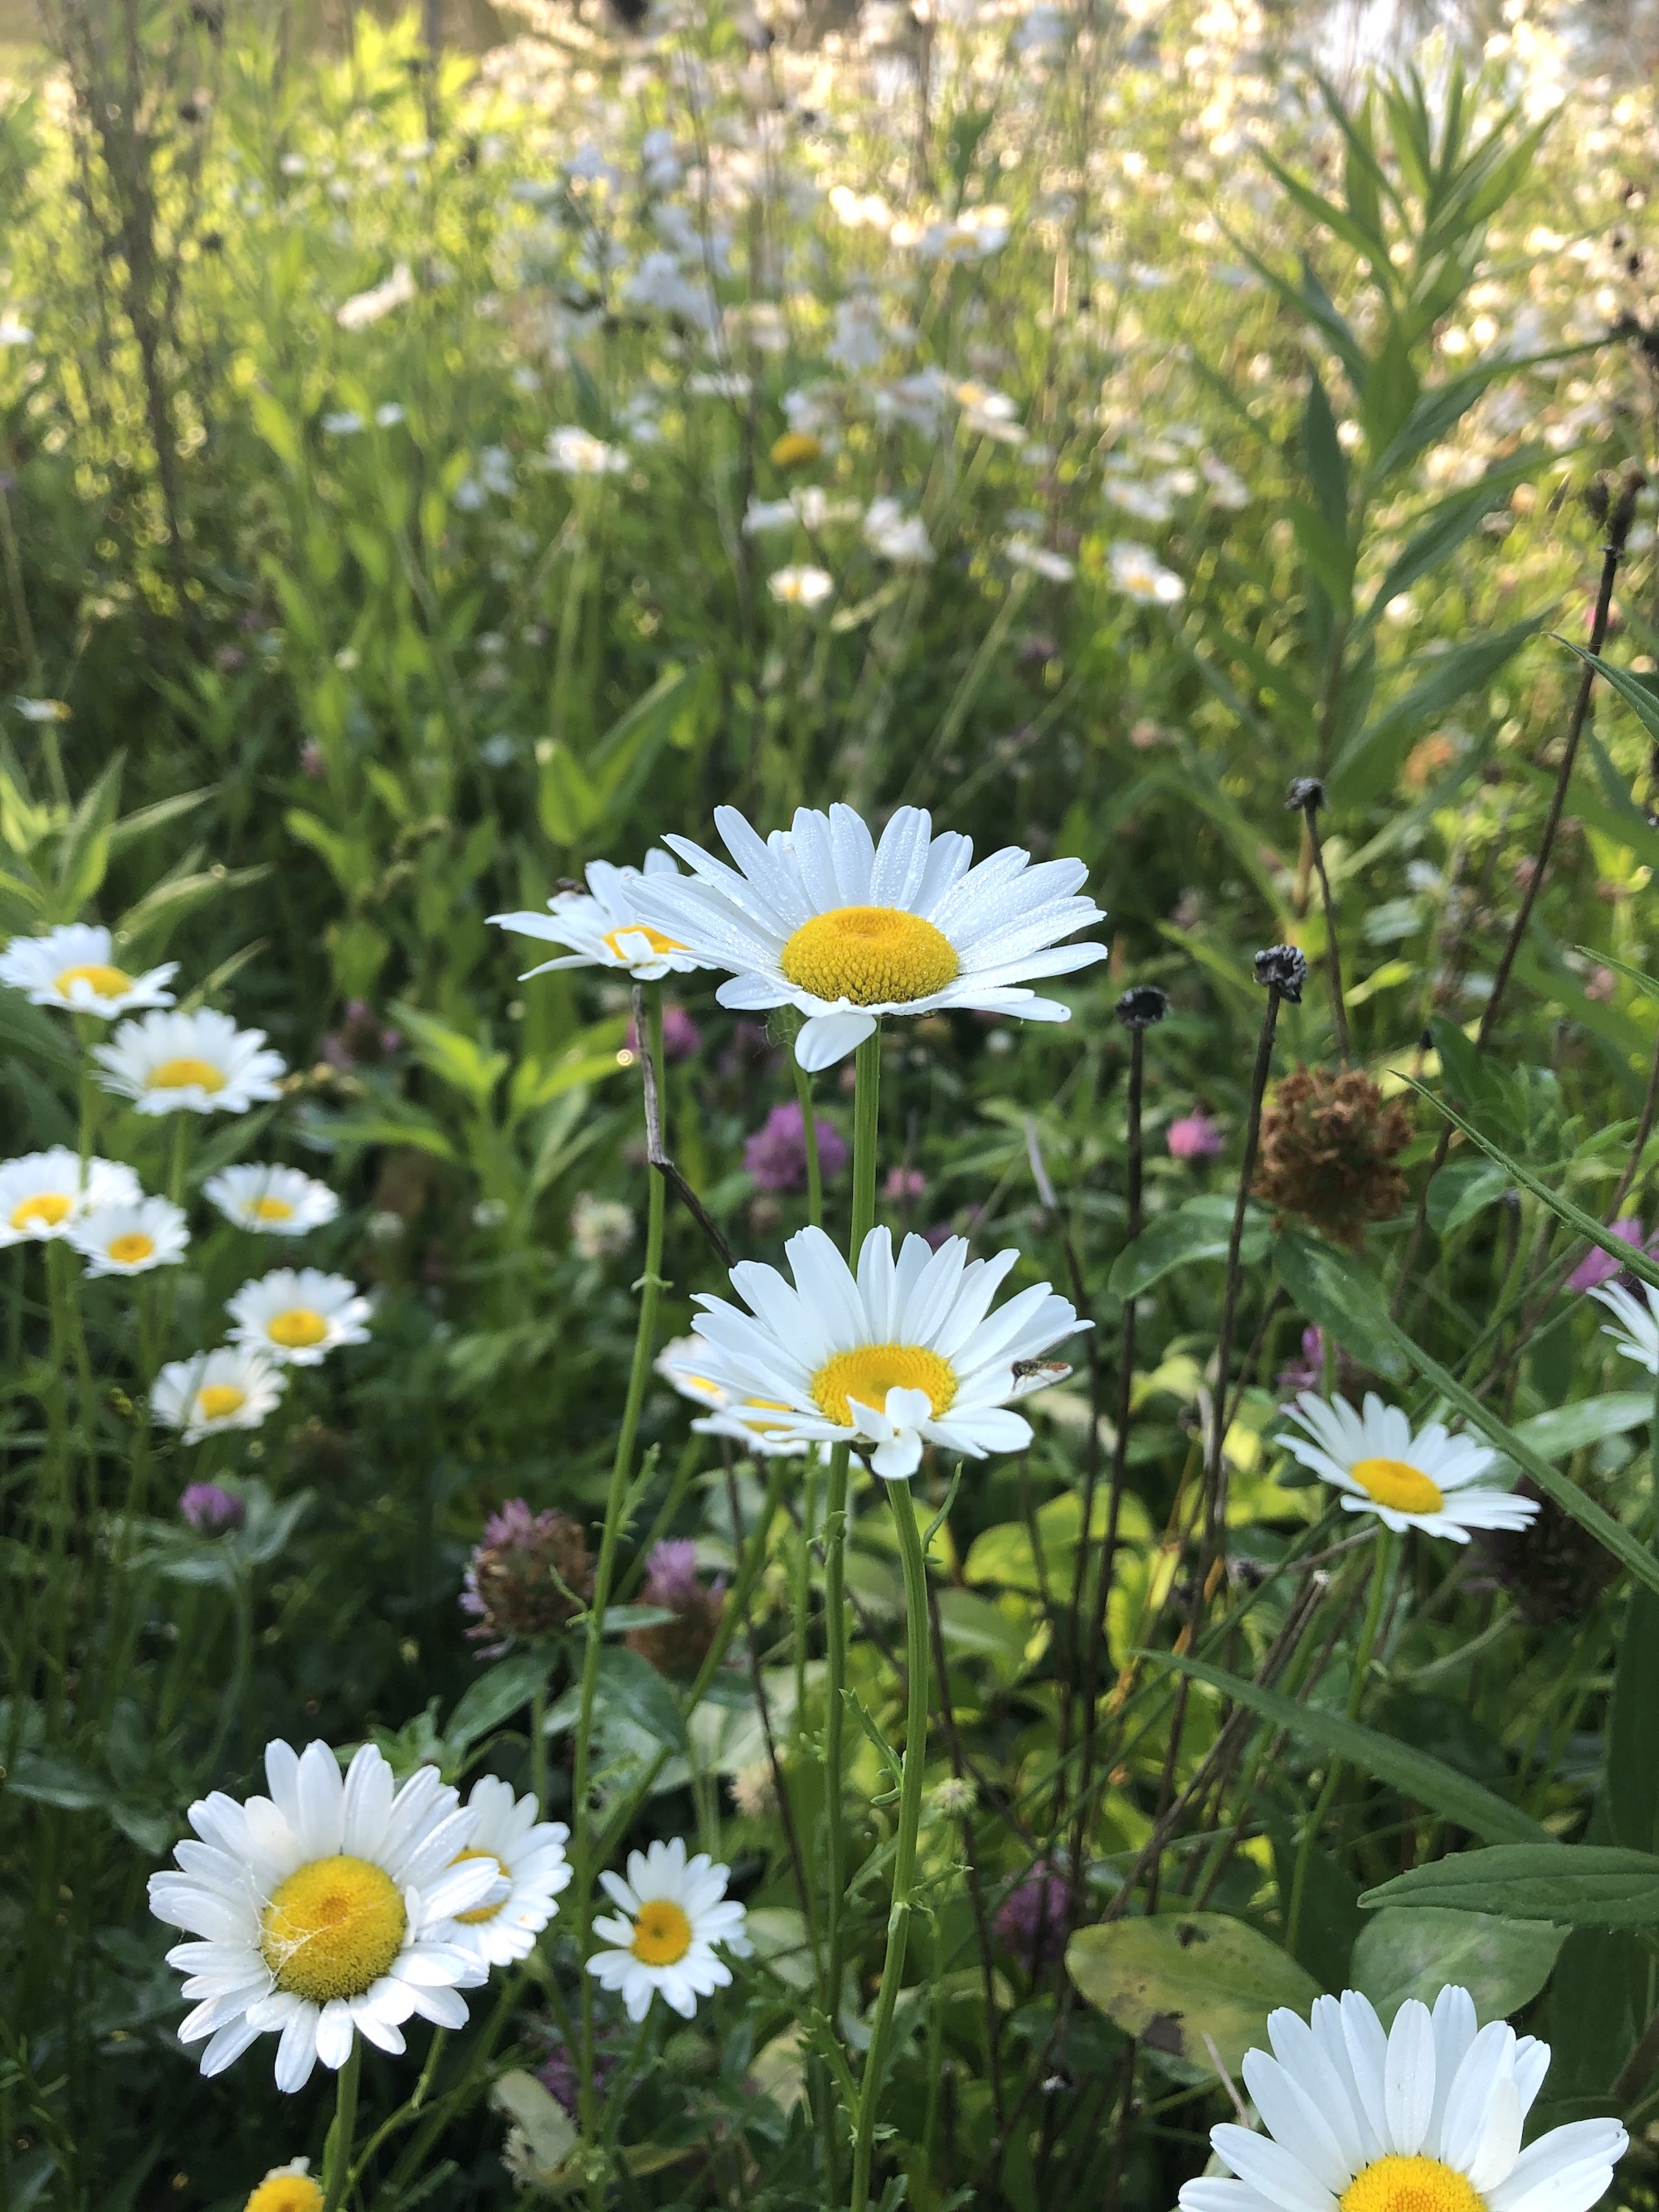 Ox-eye Daisies on bank of retaining pond in Madison, Wisconsin on June 18, 2020.